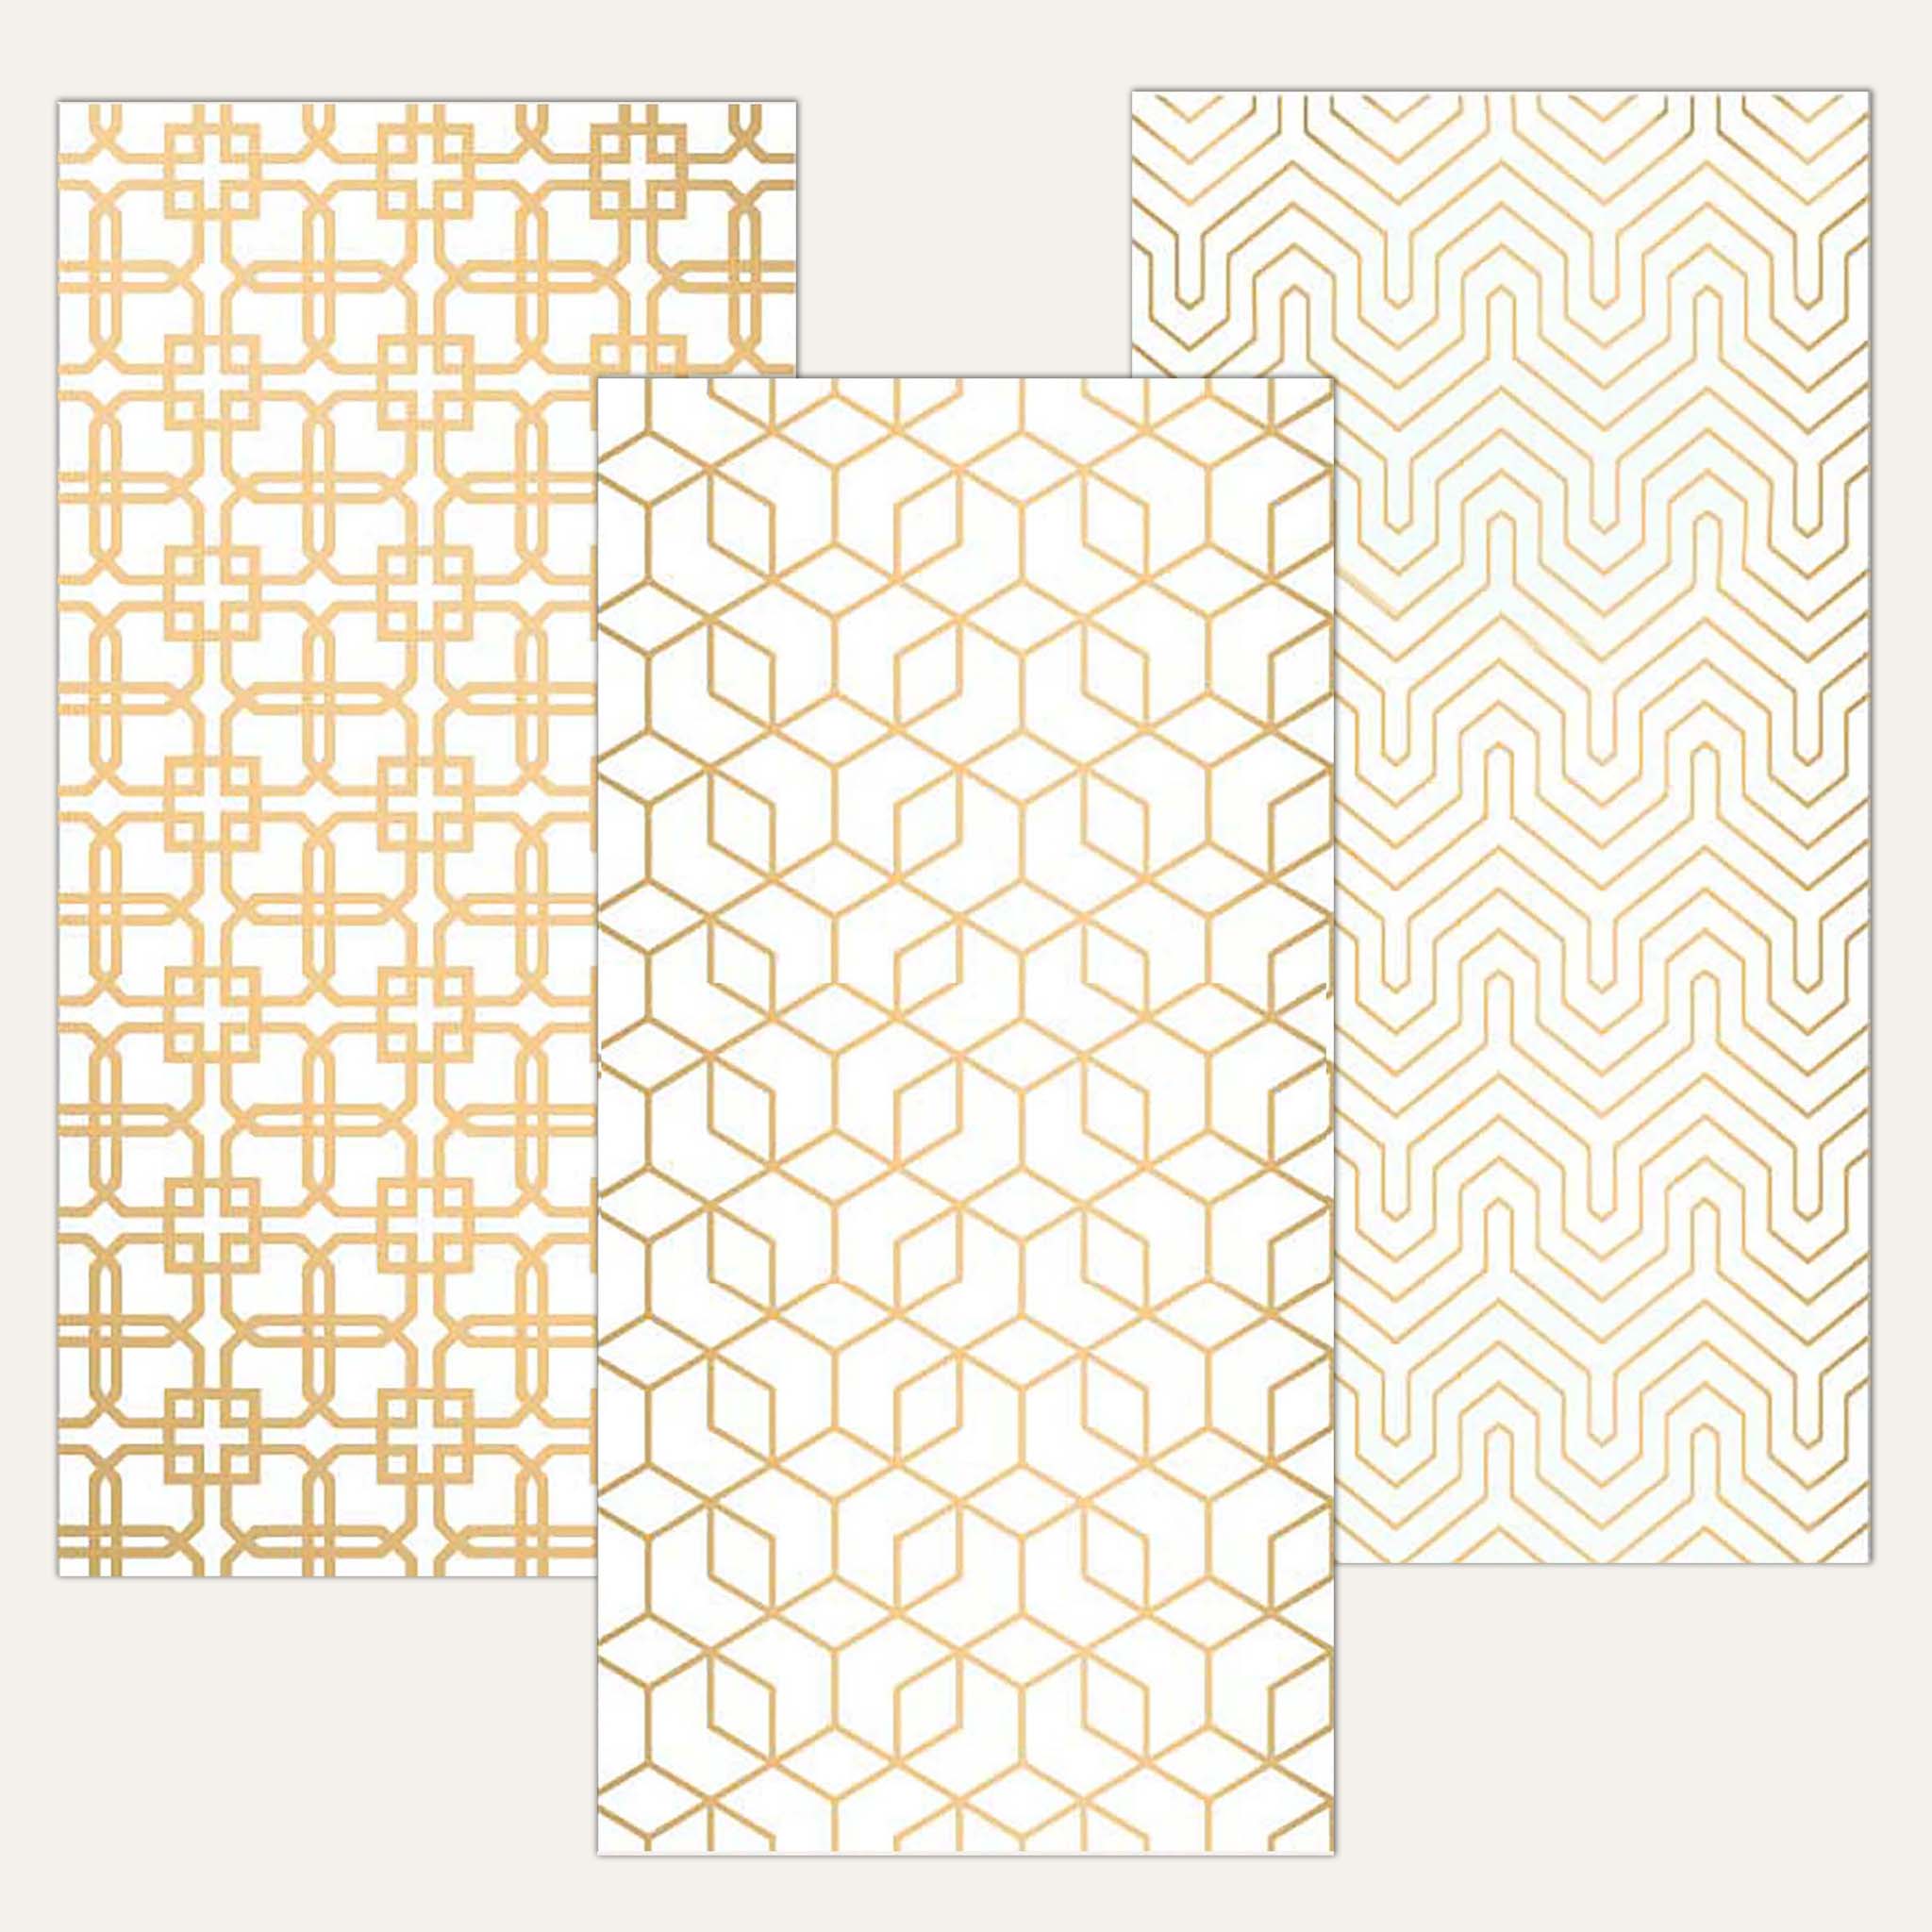 Three sheets of small rub-on transfers that feature different gold midcentury modern designs.